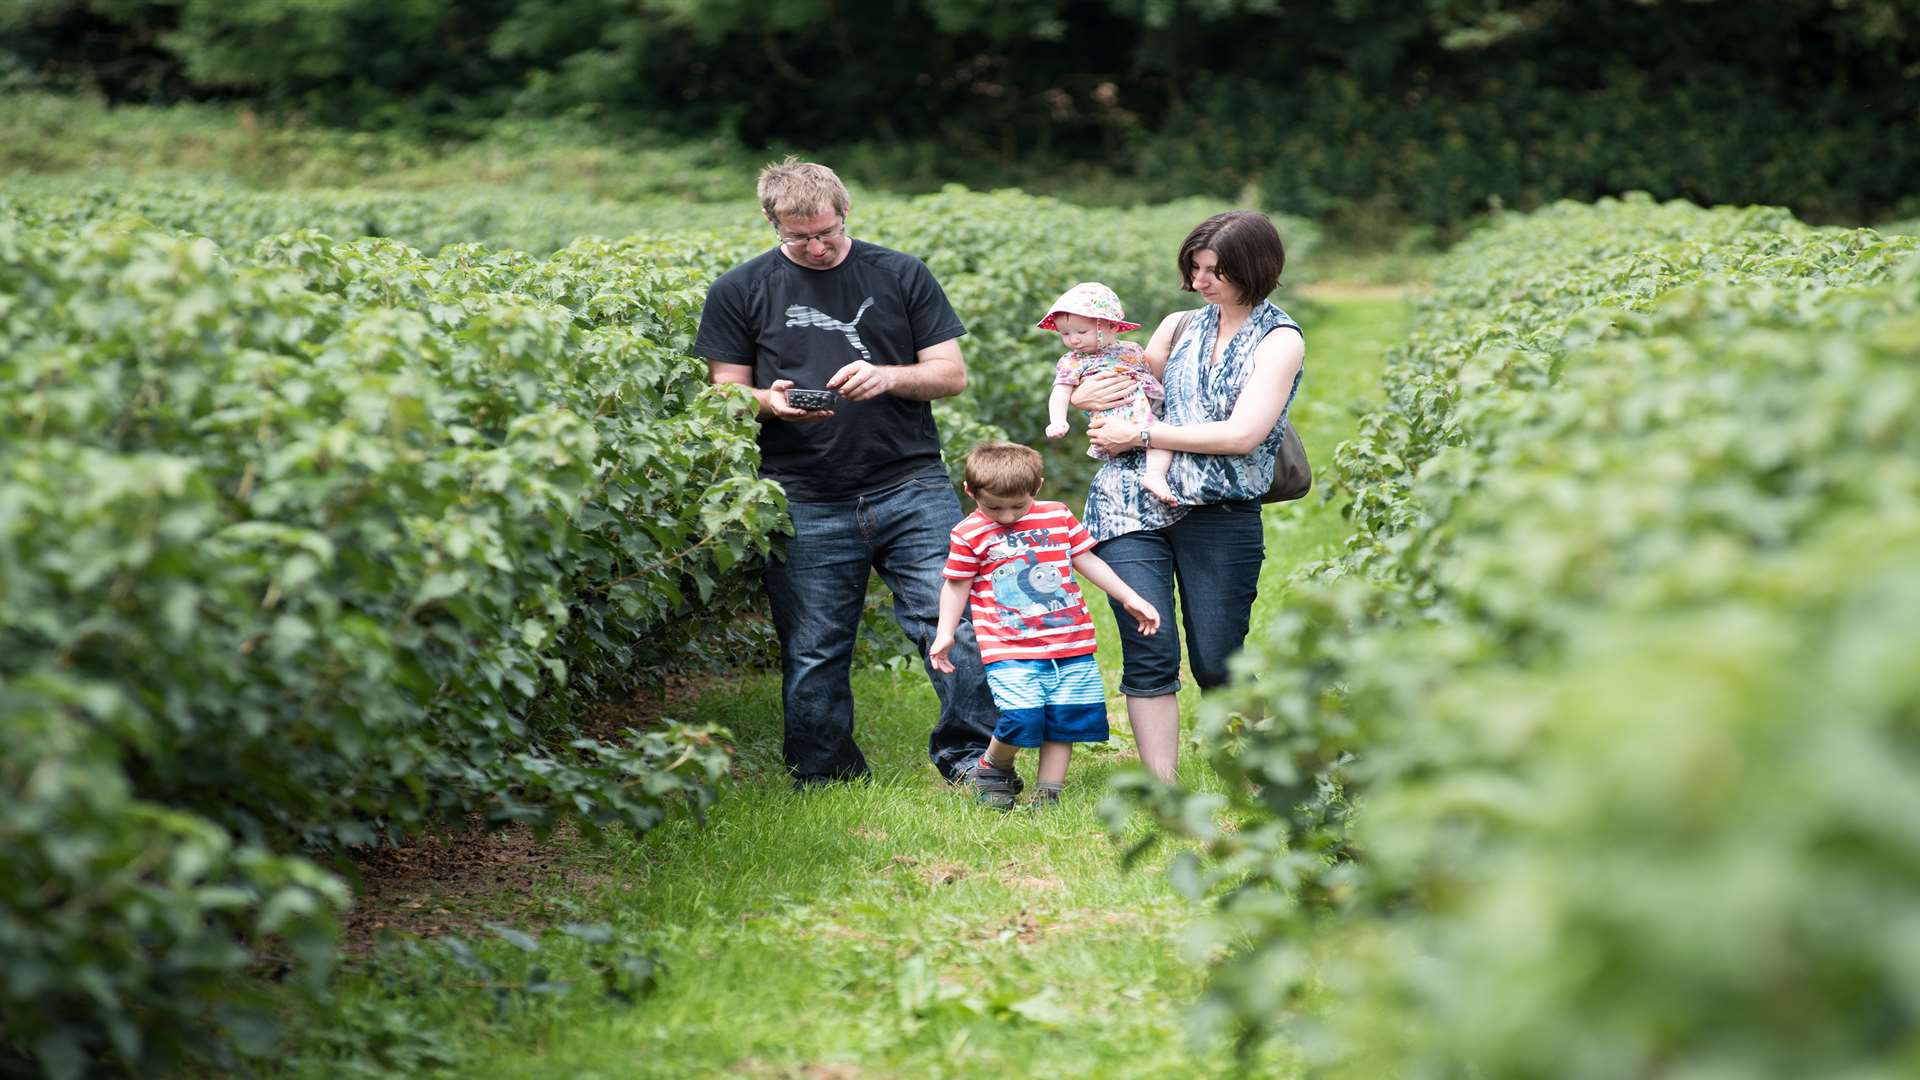 See blackcurrants for Ribena harvested at an open day